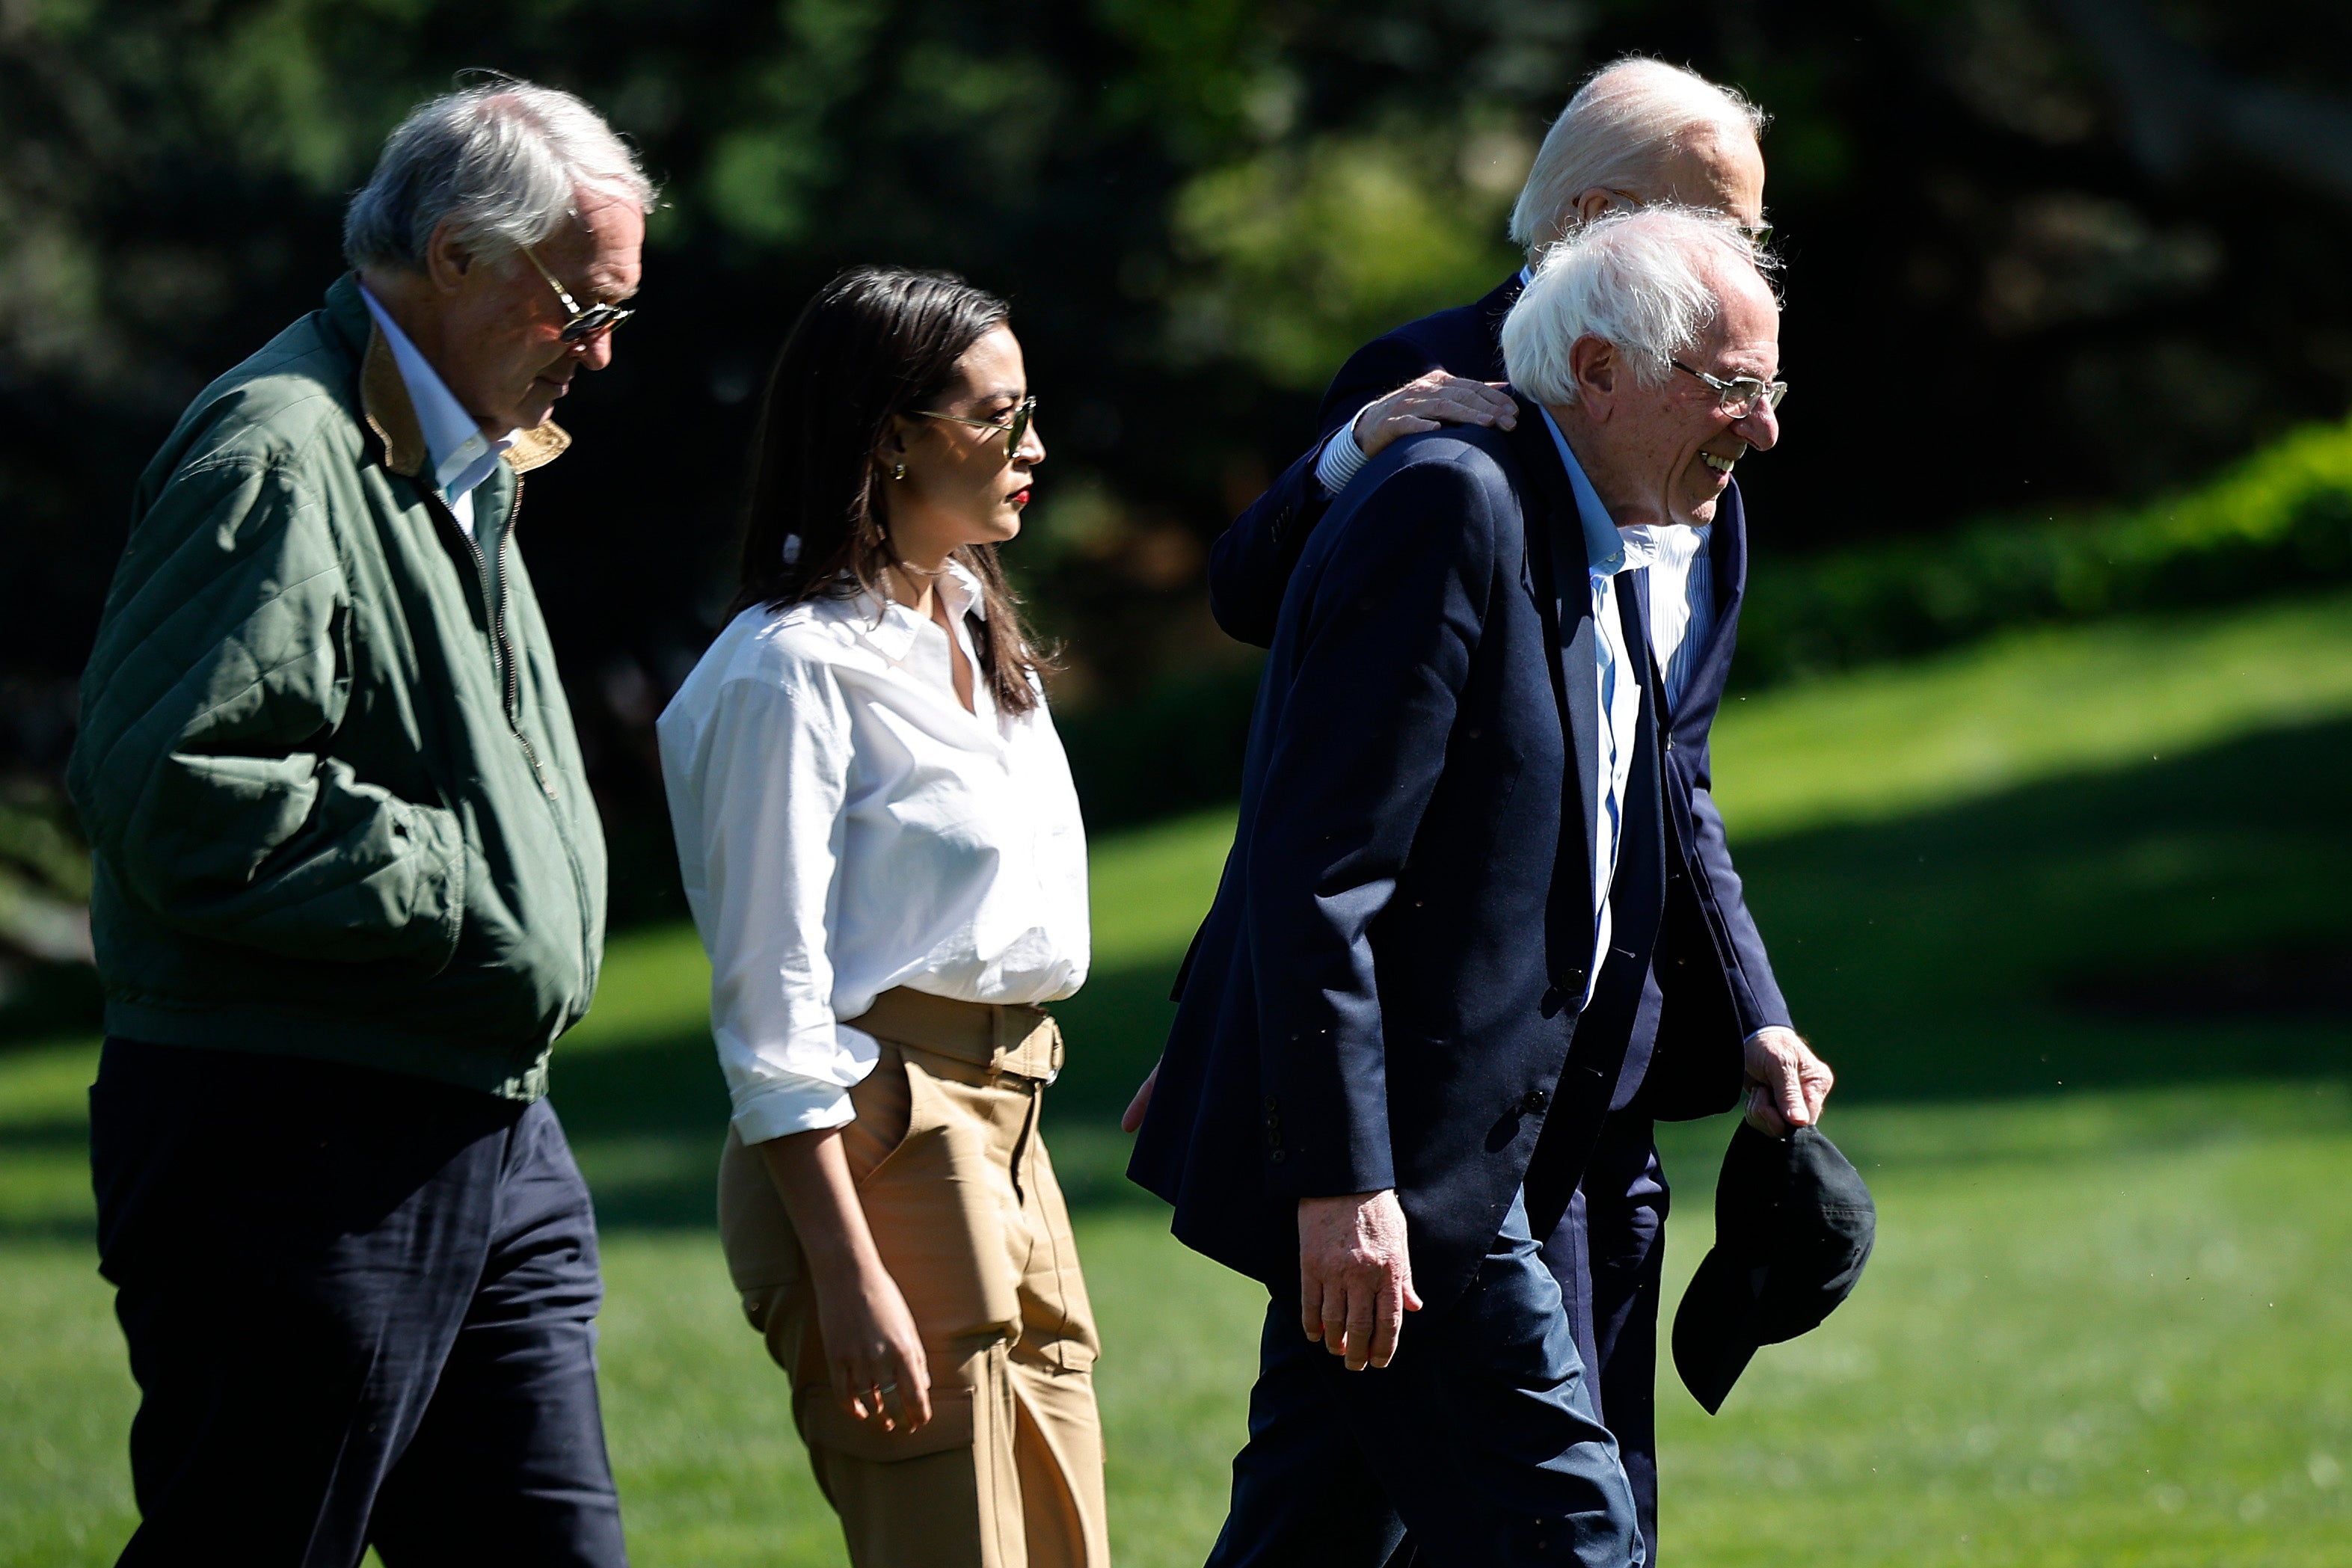 WASHINGTON, DC - APRIL 22: U.S. President Joe Biden (R), Sen. Bernie Sanders (I-VT), Sen. Ed Markey (D-MA) (L) and Rep. Alexandria Ocasio Cortez (D-NY) walk to the Oval Office after returning to the White House on April 22, 2024 in Washington, DC. Biden and the members of Congress returned to the White House following an Earth Day event in Virginia. (Photo by Chip Somodevilla/Getty Images)